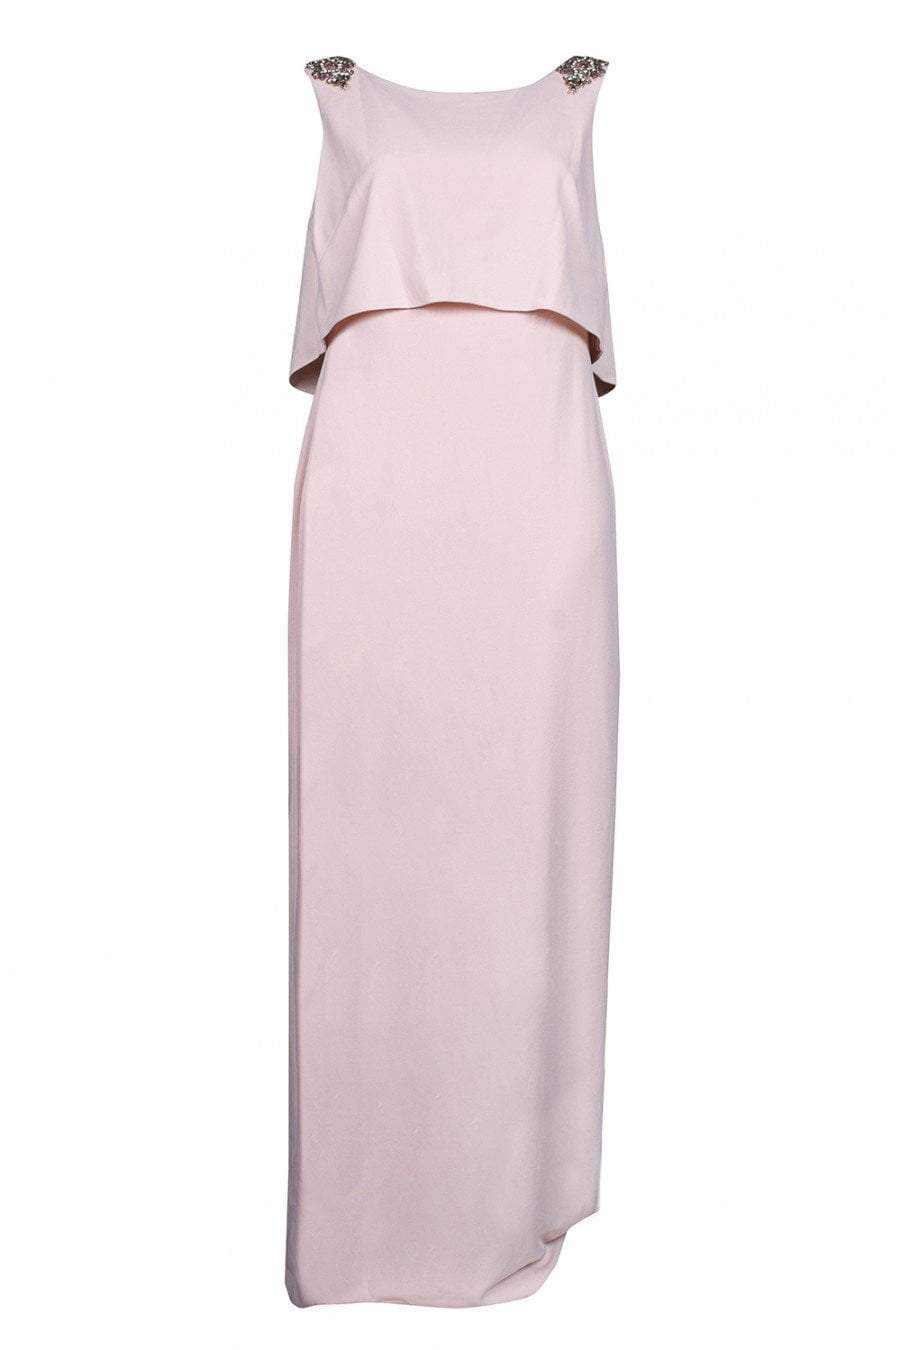 Adrianna Papell - AP1E202958 Embellished Mock Two Piece Sheath Dress In Pink